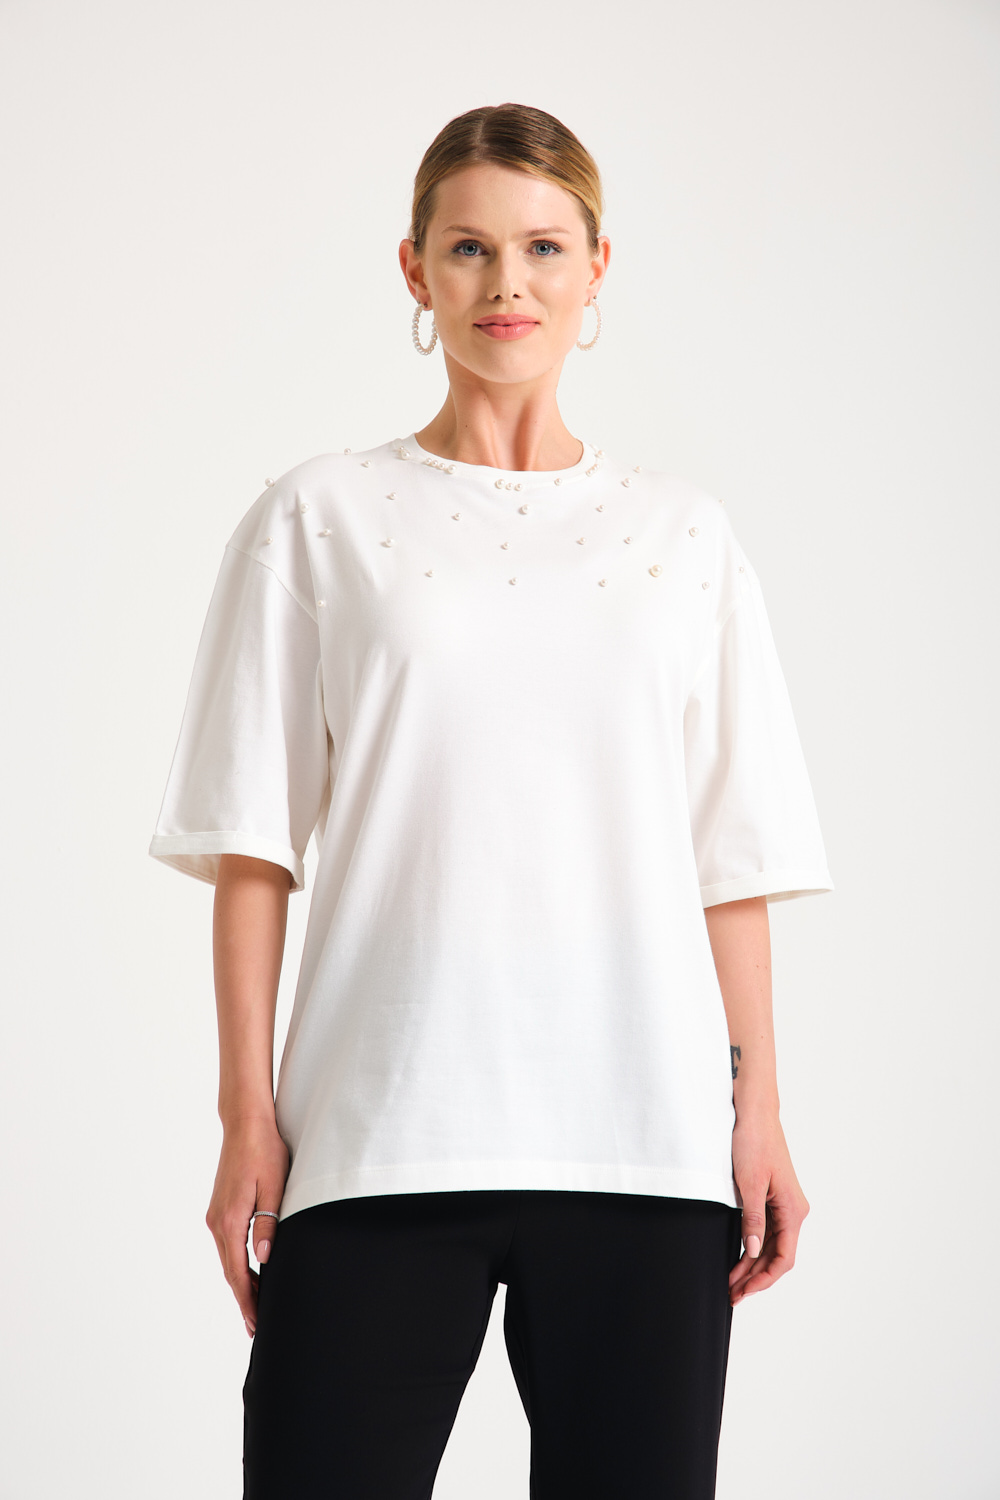 Crew Neck Front Pearl Detailed White T-Shirt